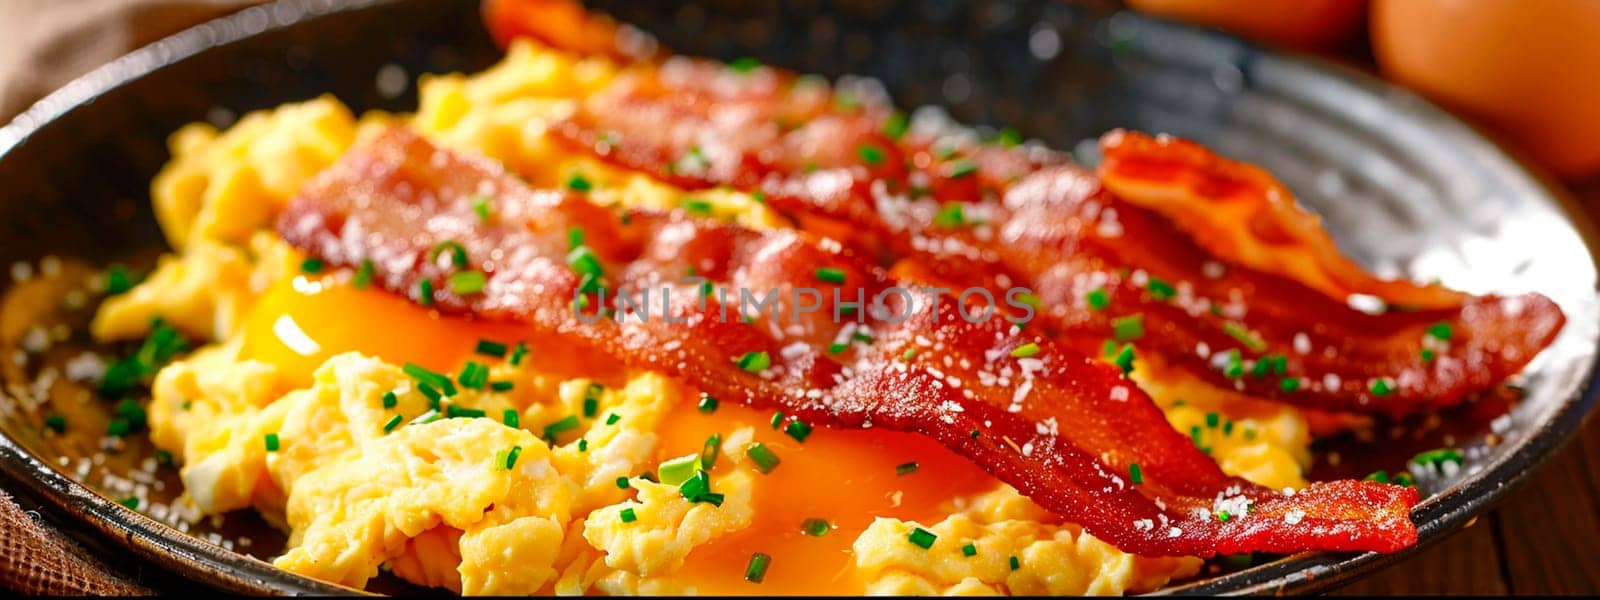 eggs and bacon on a plate. Selective focus. by yanadjana